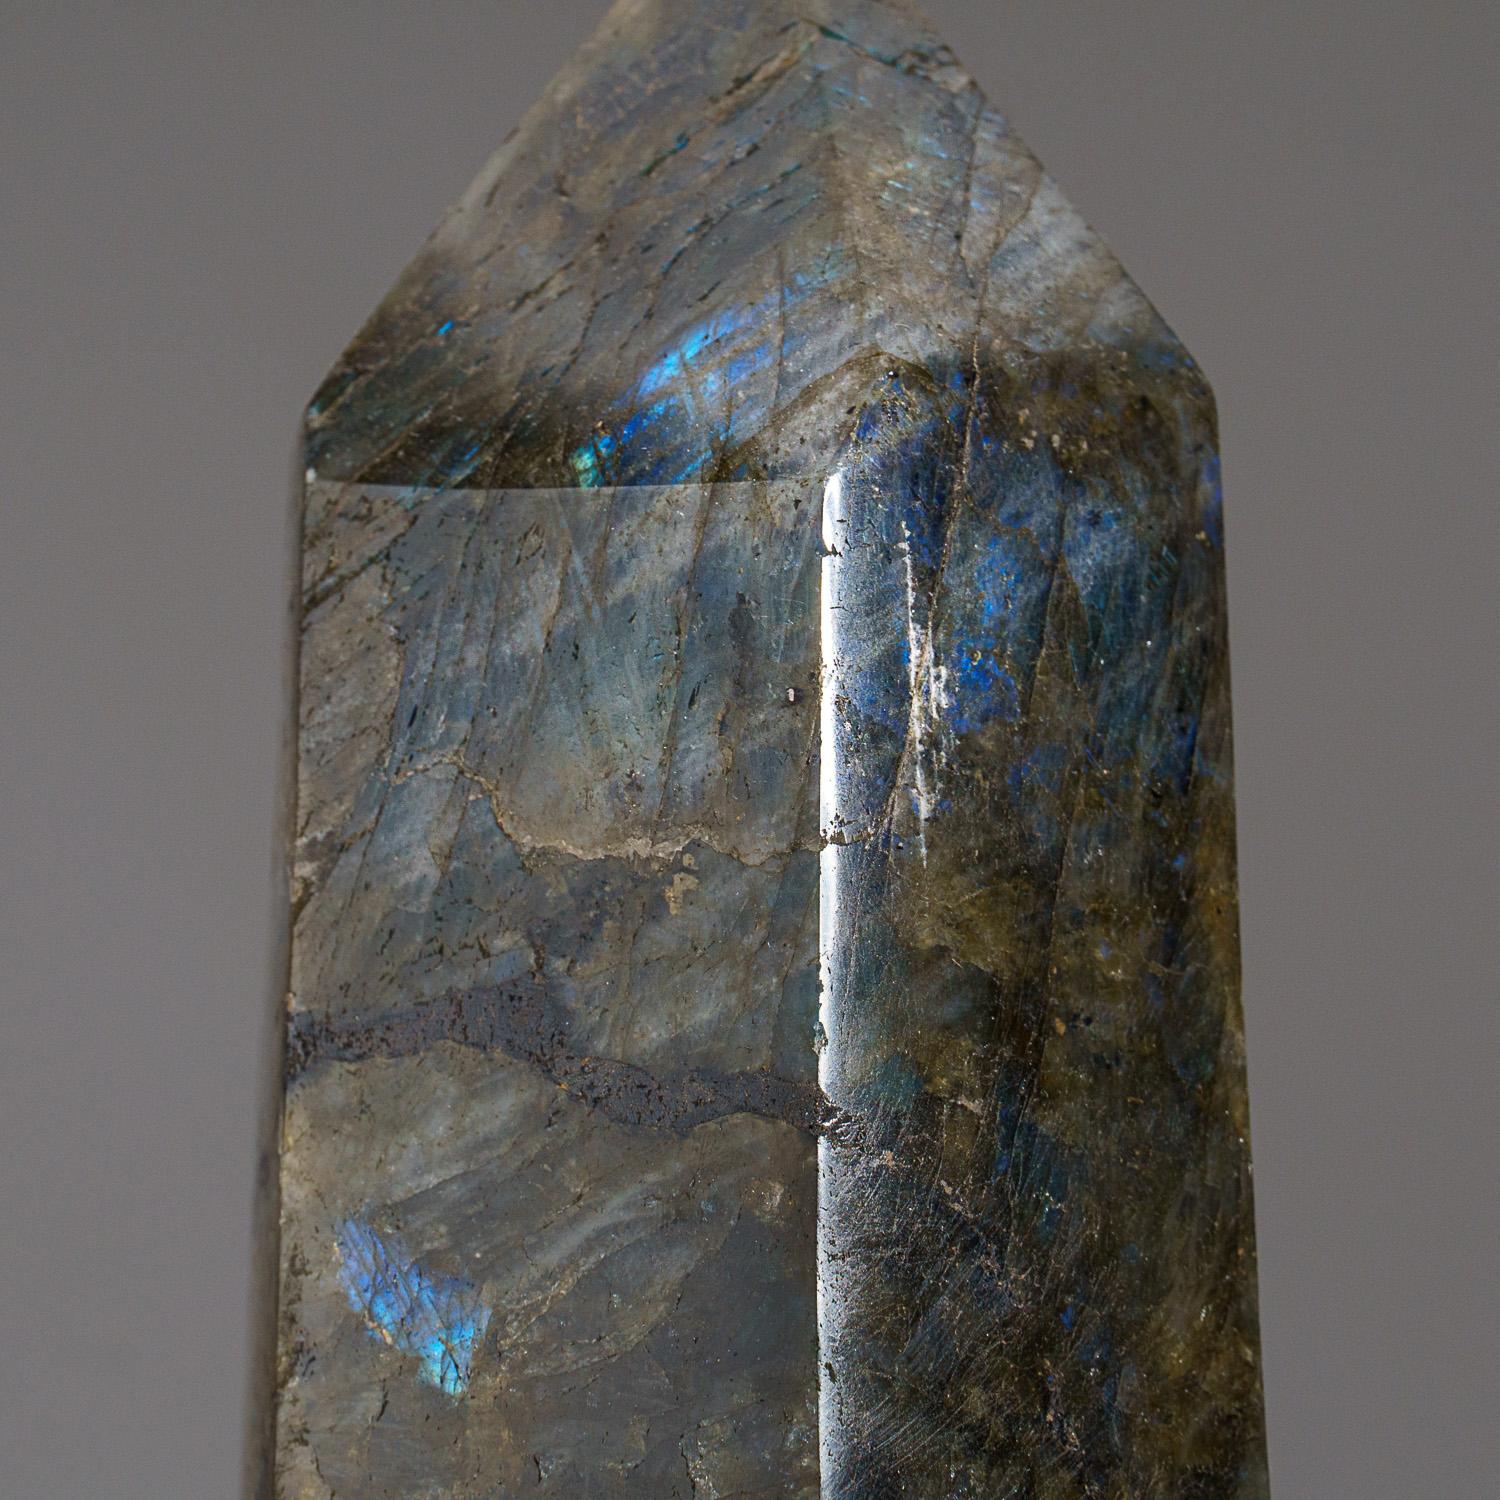 Contemporary Polished Labradorite Obelisk from Madagascar (4.9 lbs) For Sale